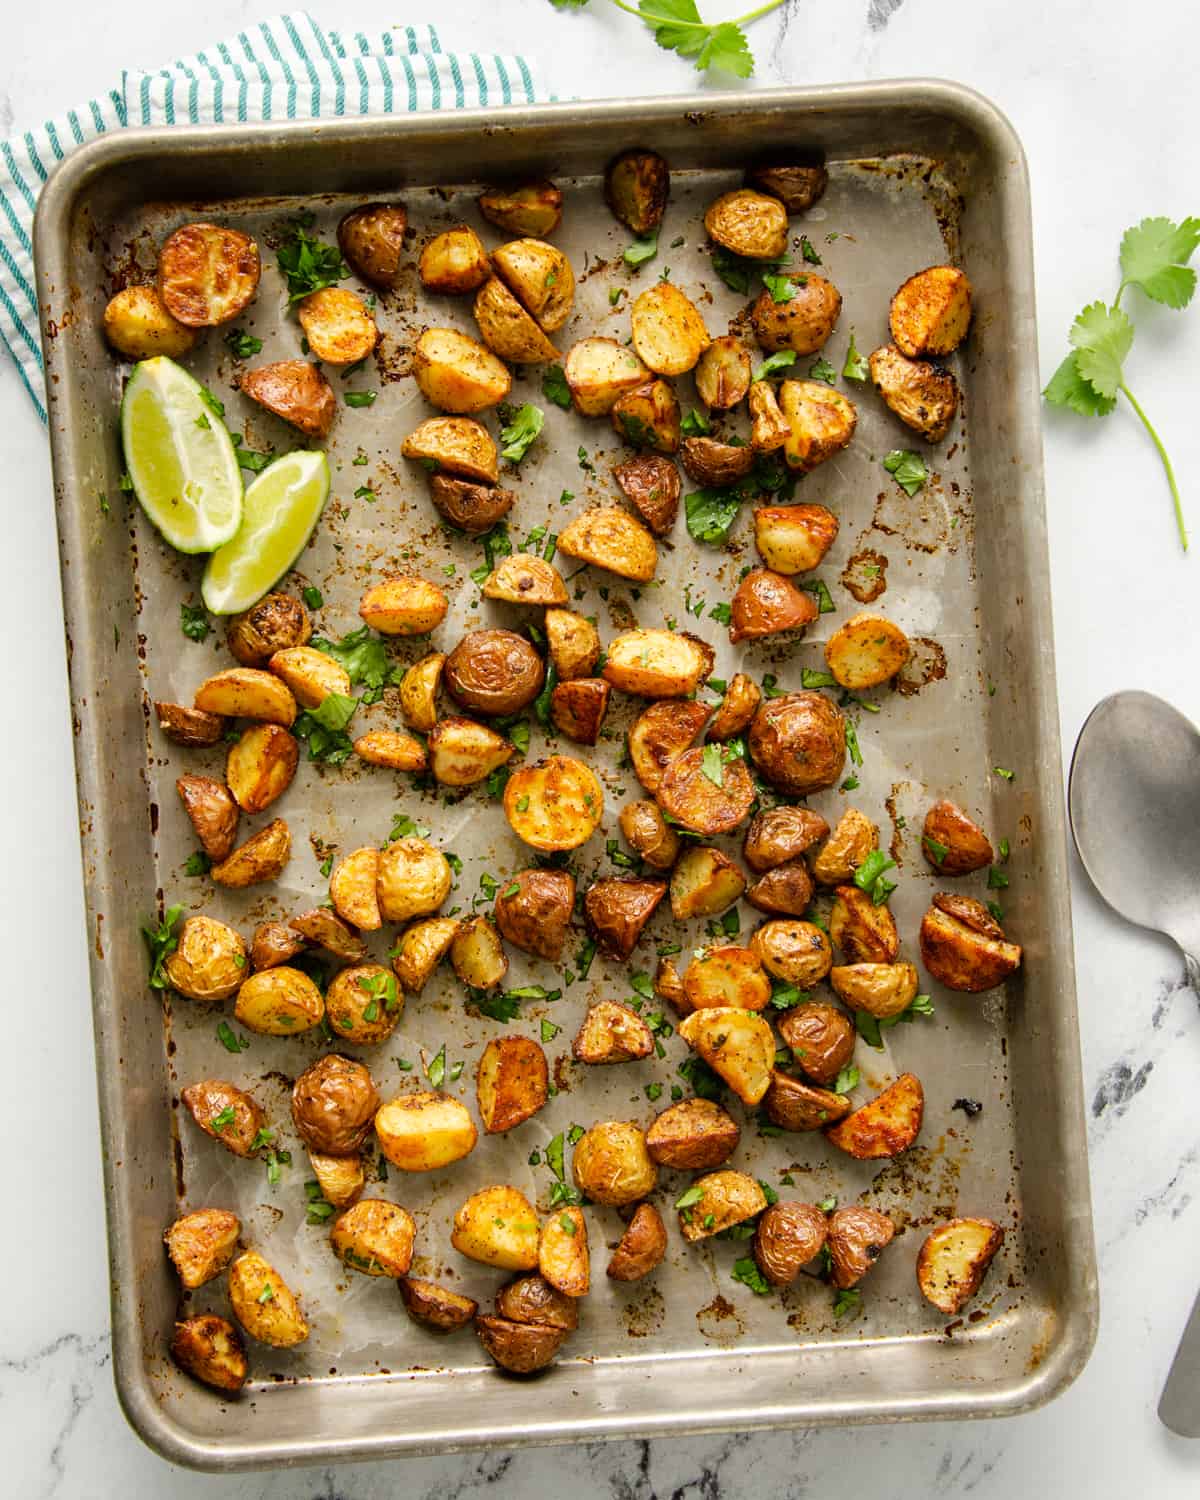 Roasted Mexican breakfast potatoes on a baking sheet with lime wedges and topped with cilantro.